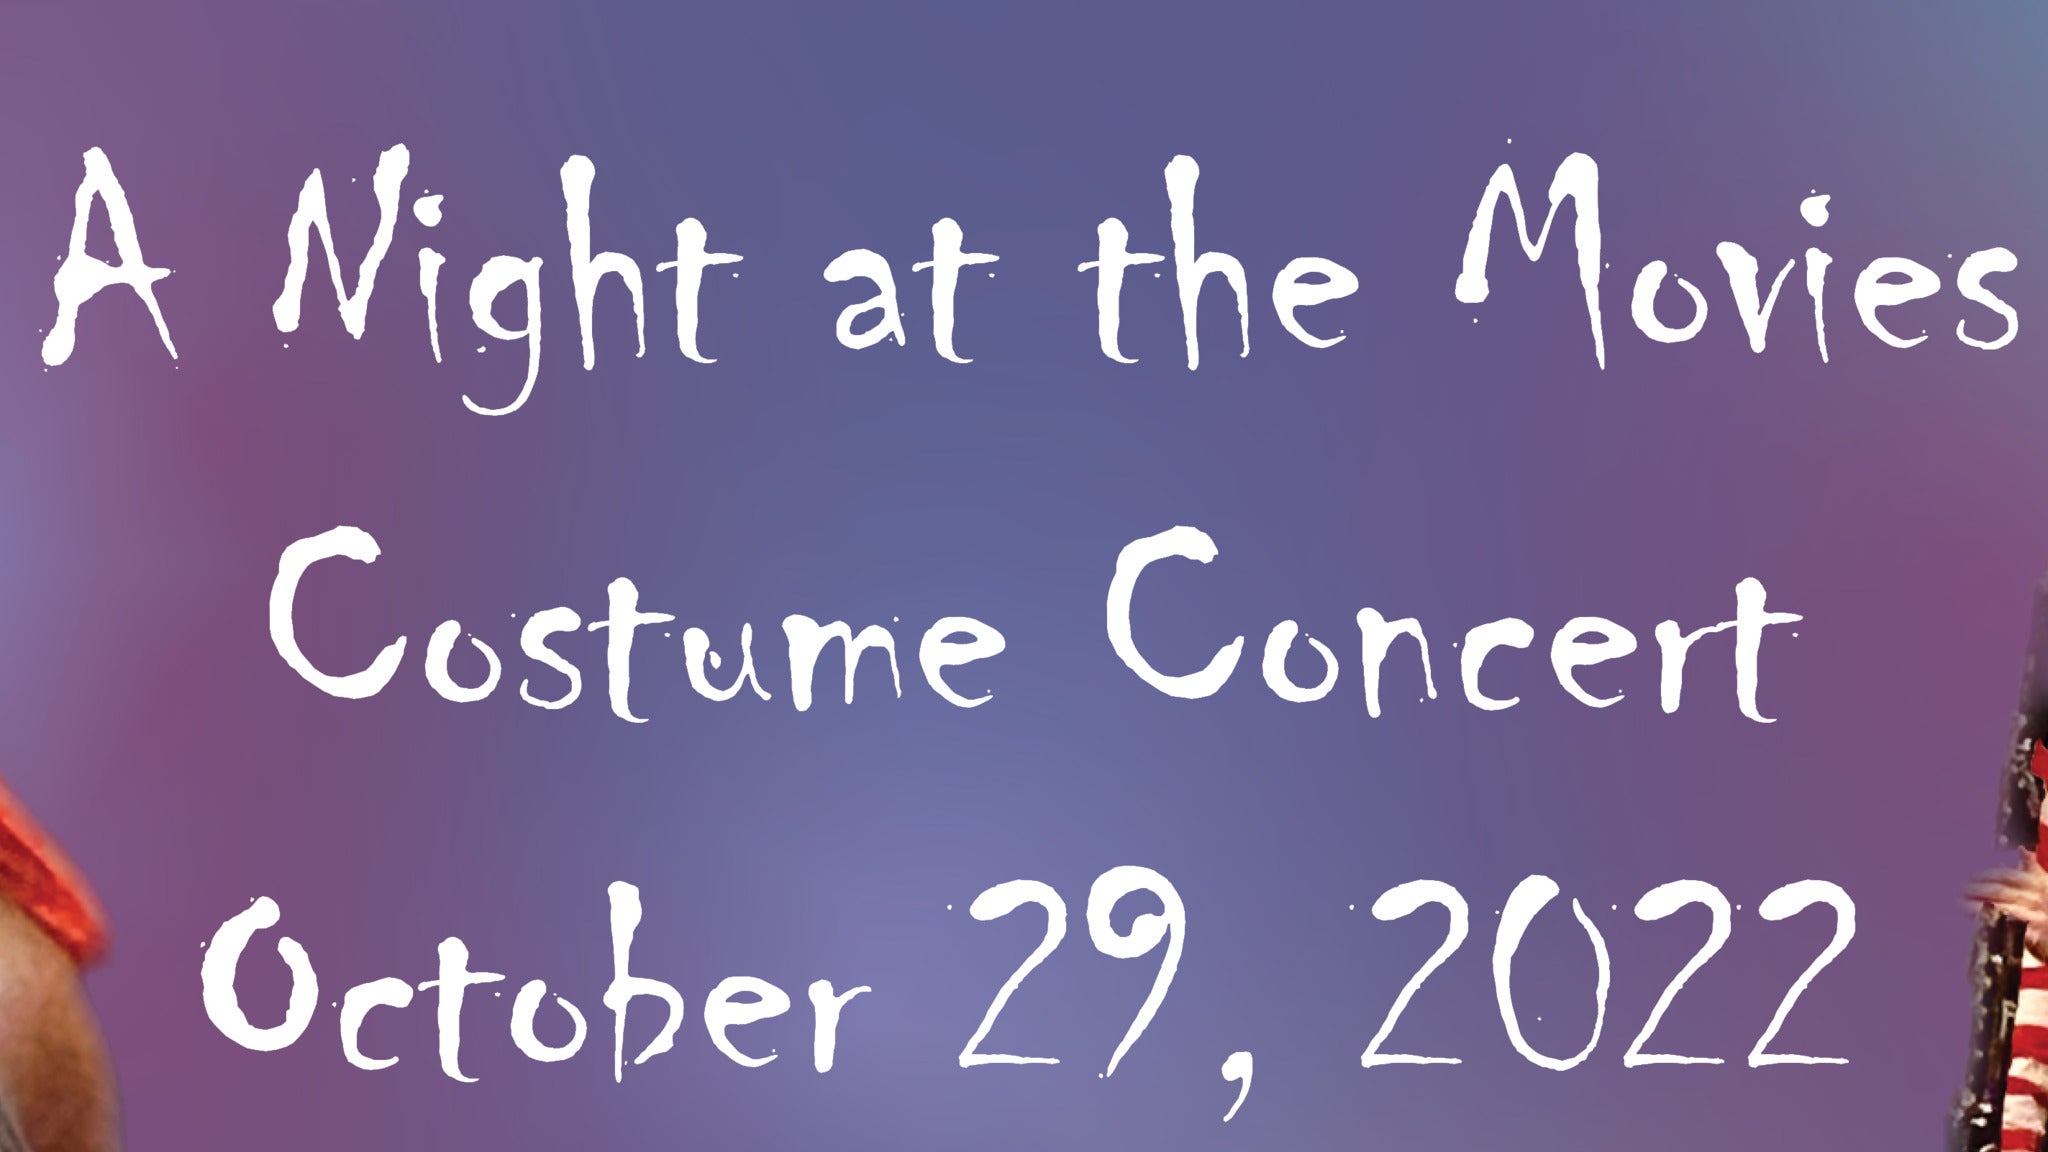 Tacoma Youth Symphony: A Night at the Movies Costume Concert